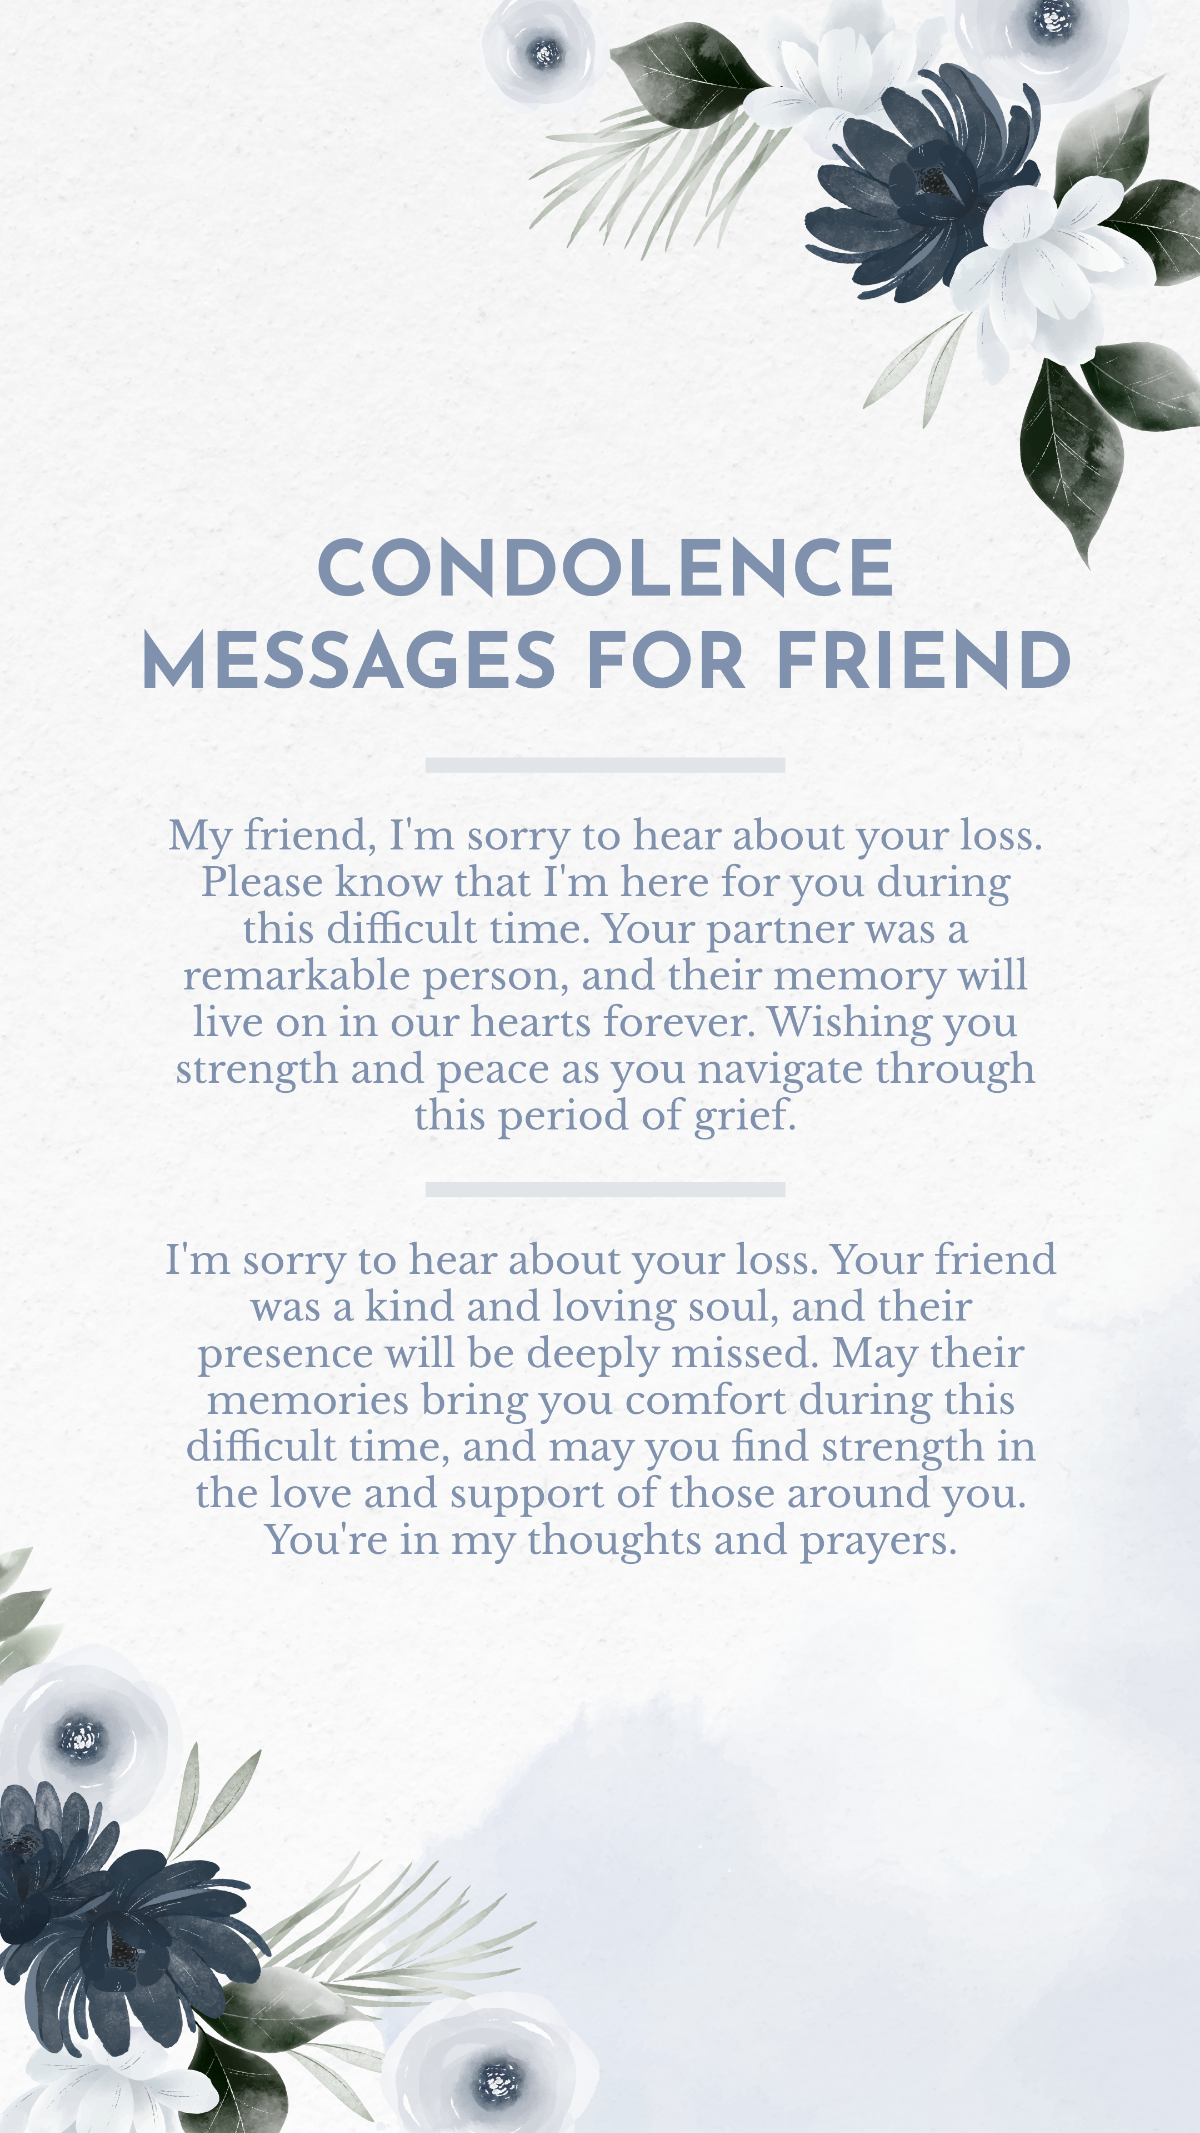 Condolence Messages For Friend Template